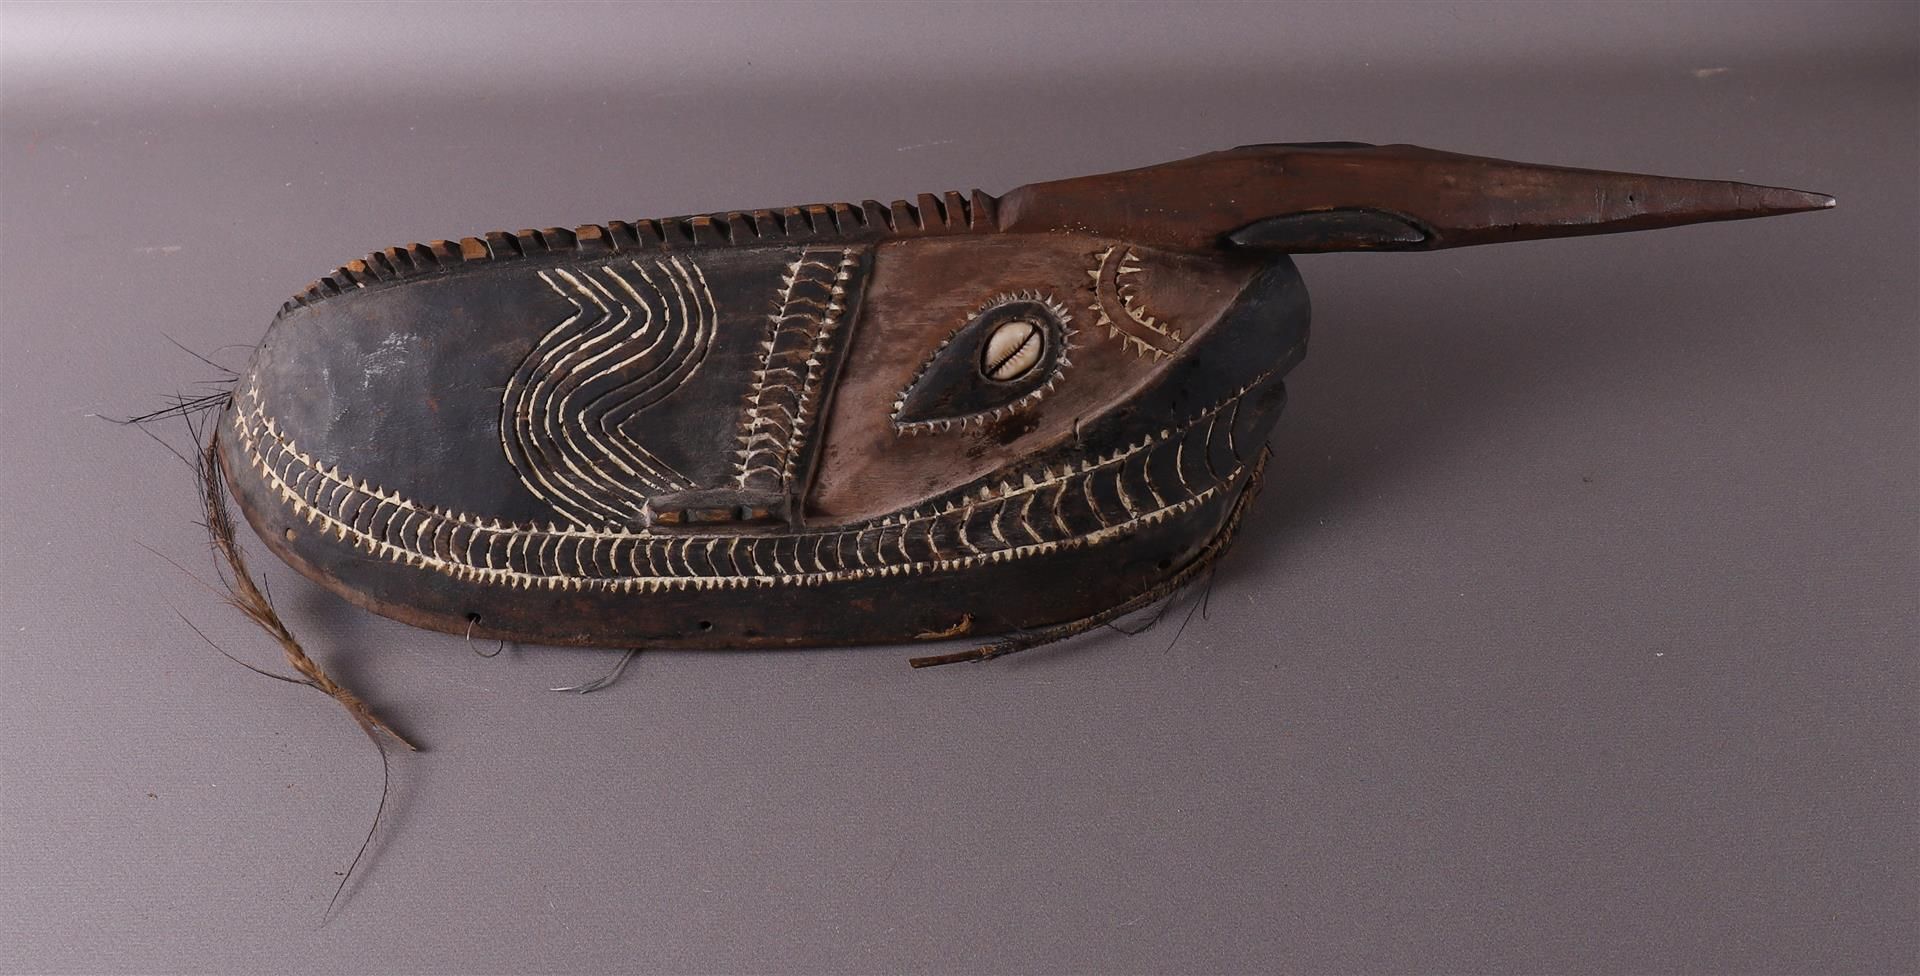 Ethnography/Tribal. A wooden mask, Sepik, Papua New Guinea. - Image 3 of 4